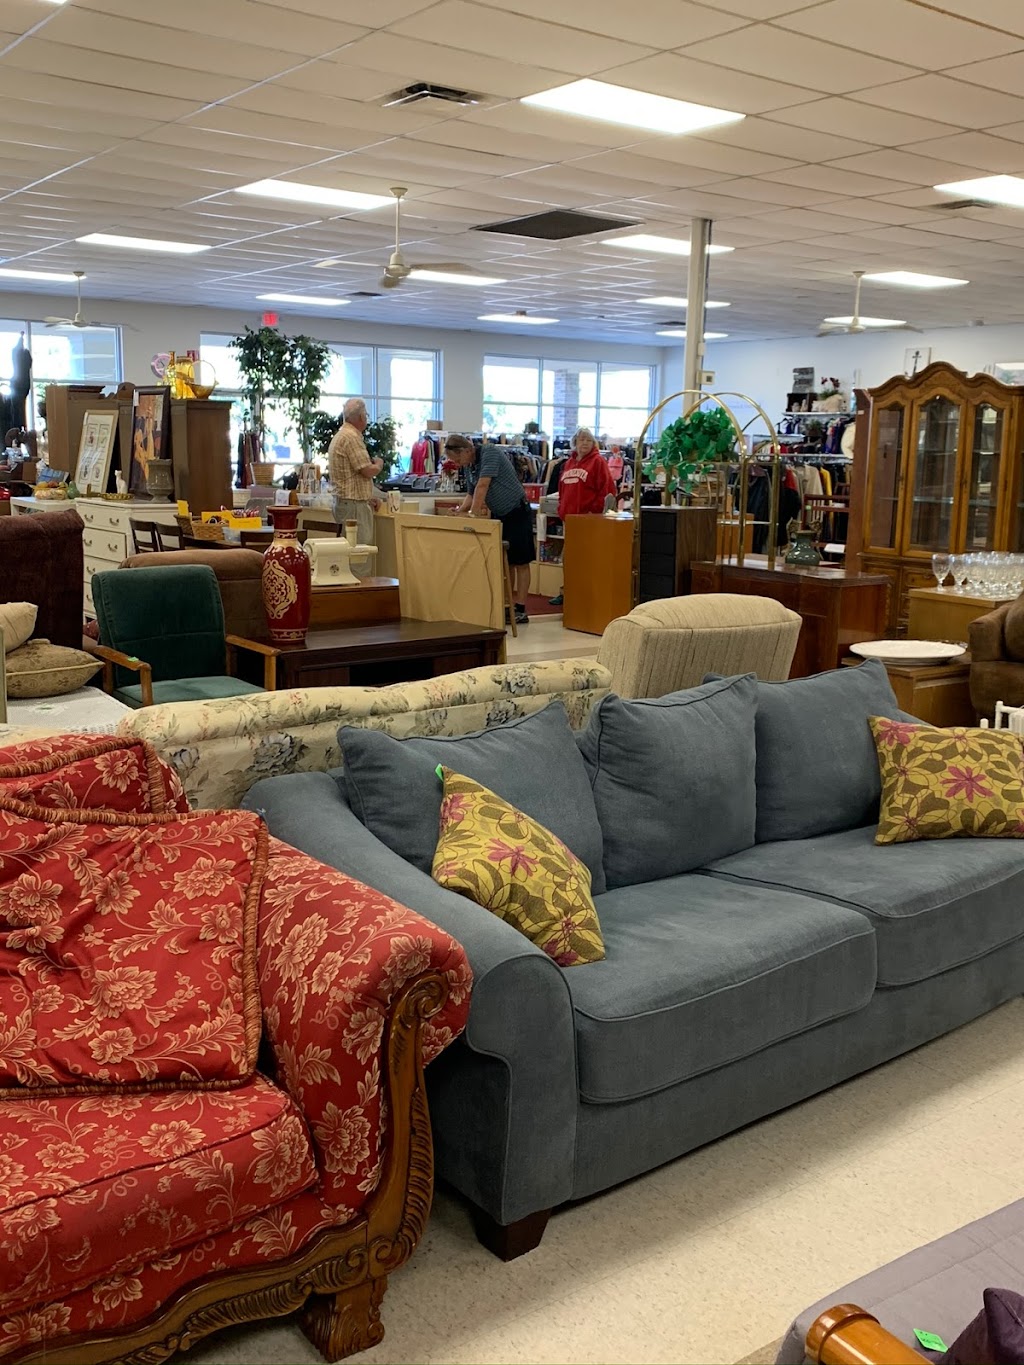 Lake County Missions Thrift Store | 415 N Grove St, Eustis, FL 32726 | Phone: (352) 357-7201